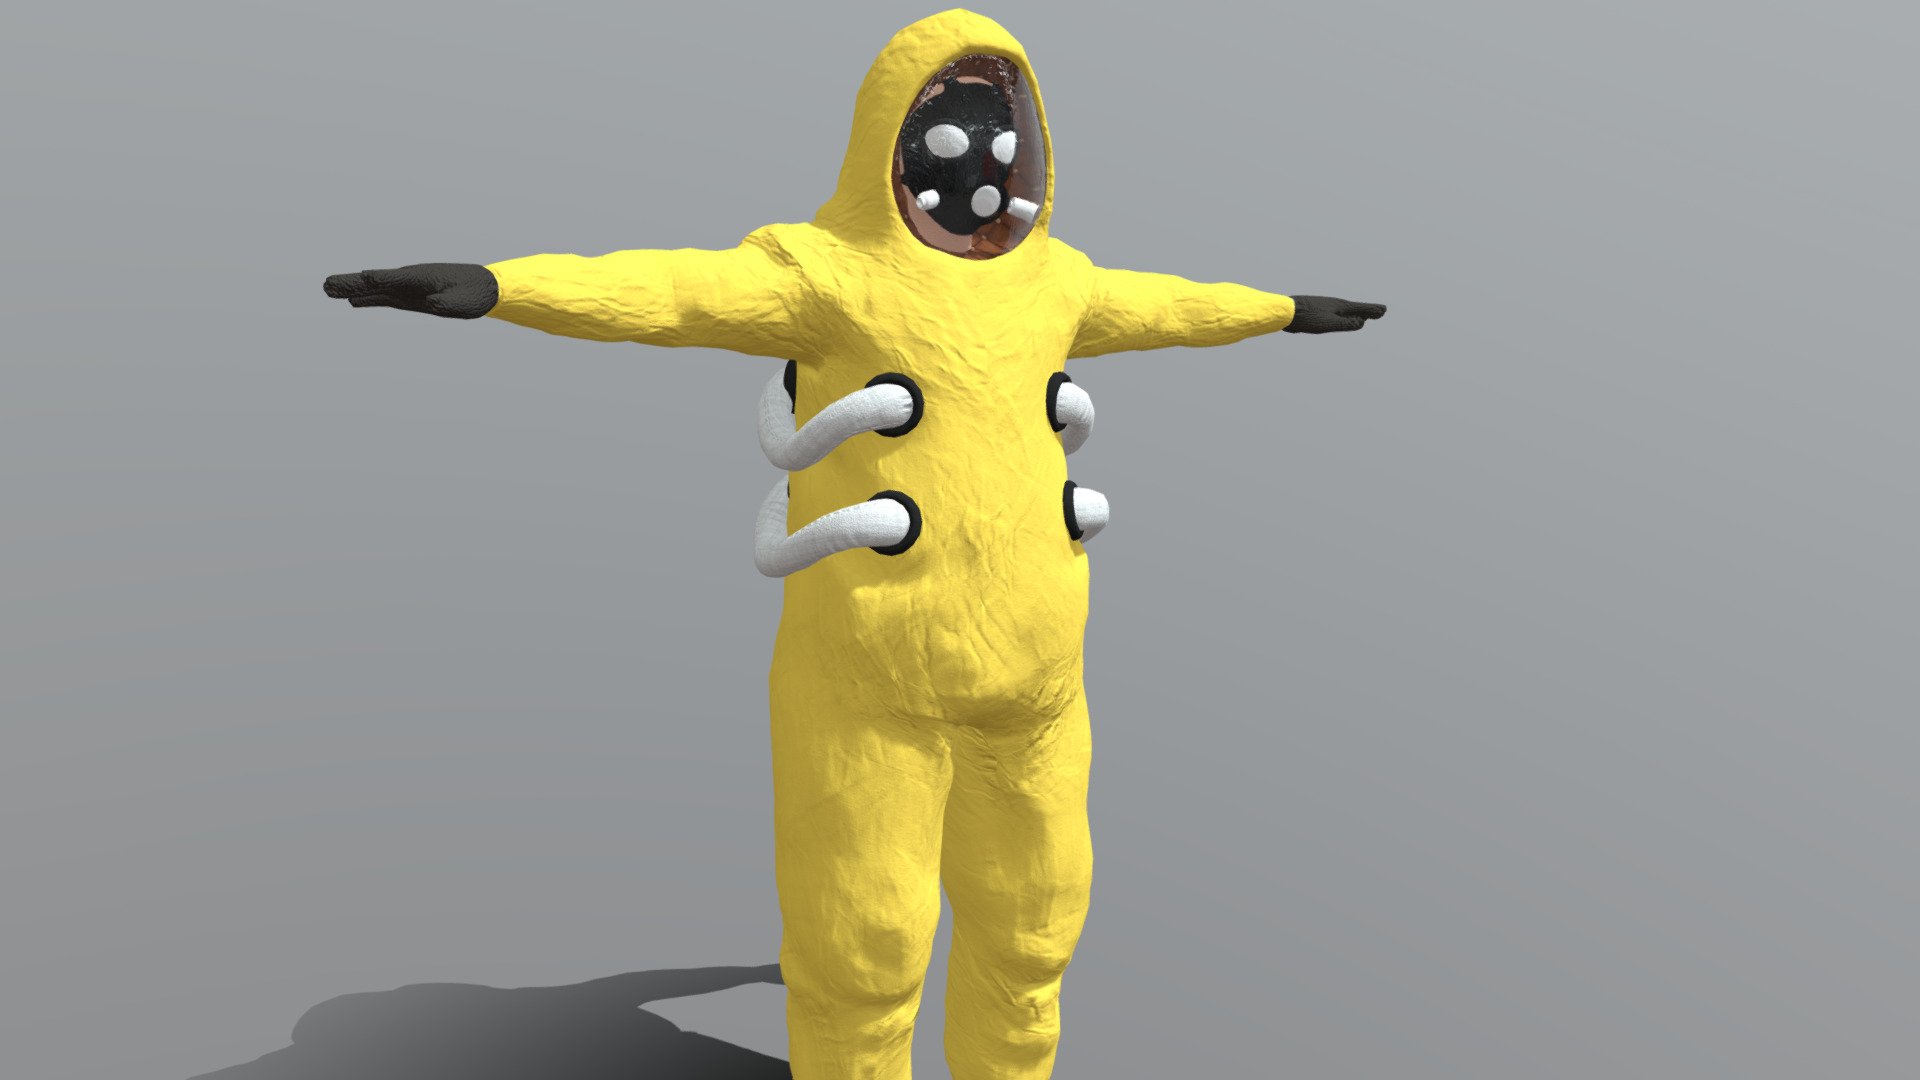 Backrooms Kit Builder lets you make the Backrooms in your very own animation using a rigged hazmat suit. Obj models, fbx file, Collada .dae, and blender save, Cr2 files to open in Poser (native) and Daz3D Studio. Opening this kit in your software of choice should be easy. You'll be animating characters in found footage of the Backrooms liminal spaces fast, get it now!

NOTE
Requires Poser 6 or later or Daz for Cr2, Pz2, and Pp2 files. Fbx /Obj's are universal. Images rendered in Octane via Poser Pro 11 but will look similar in any PBR render. Fbx file is an export from poser as a 2019 fbx. Blender file is that fbx imported and the pose set to the rest pose and keyframed. Some materials may need to be reassigned or edited in blender. 
https://youtu.be/ZaNjvWKp55s
https://youtu.be/uzq2816CzVk
https://youtu.be/9VHV80vh8bA
https://youtu.be/wQ3LlIF5rXA - Backrooms Kit Builder and Hazmat Suit - Buy Royalty Free 3D model by Darkseal 3d model